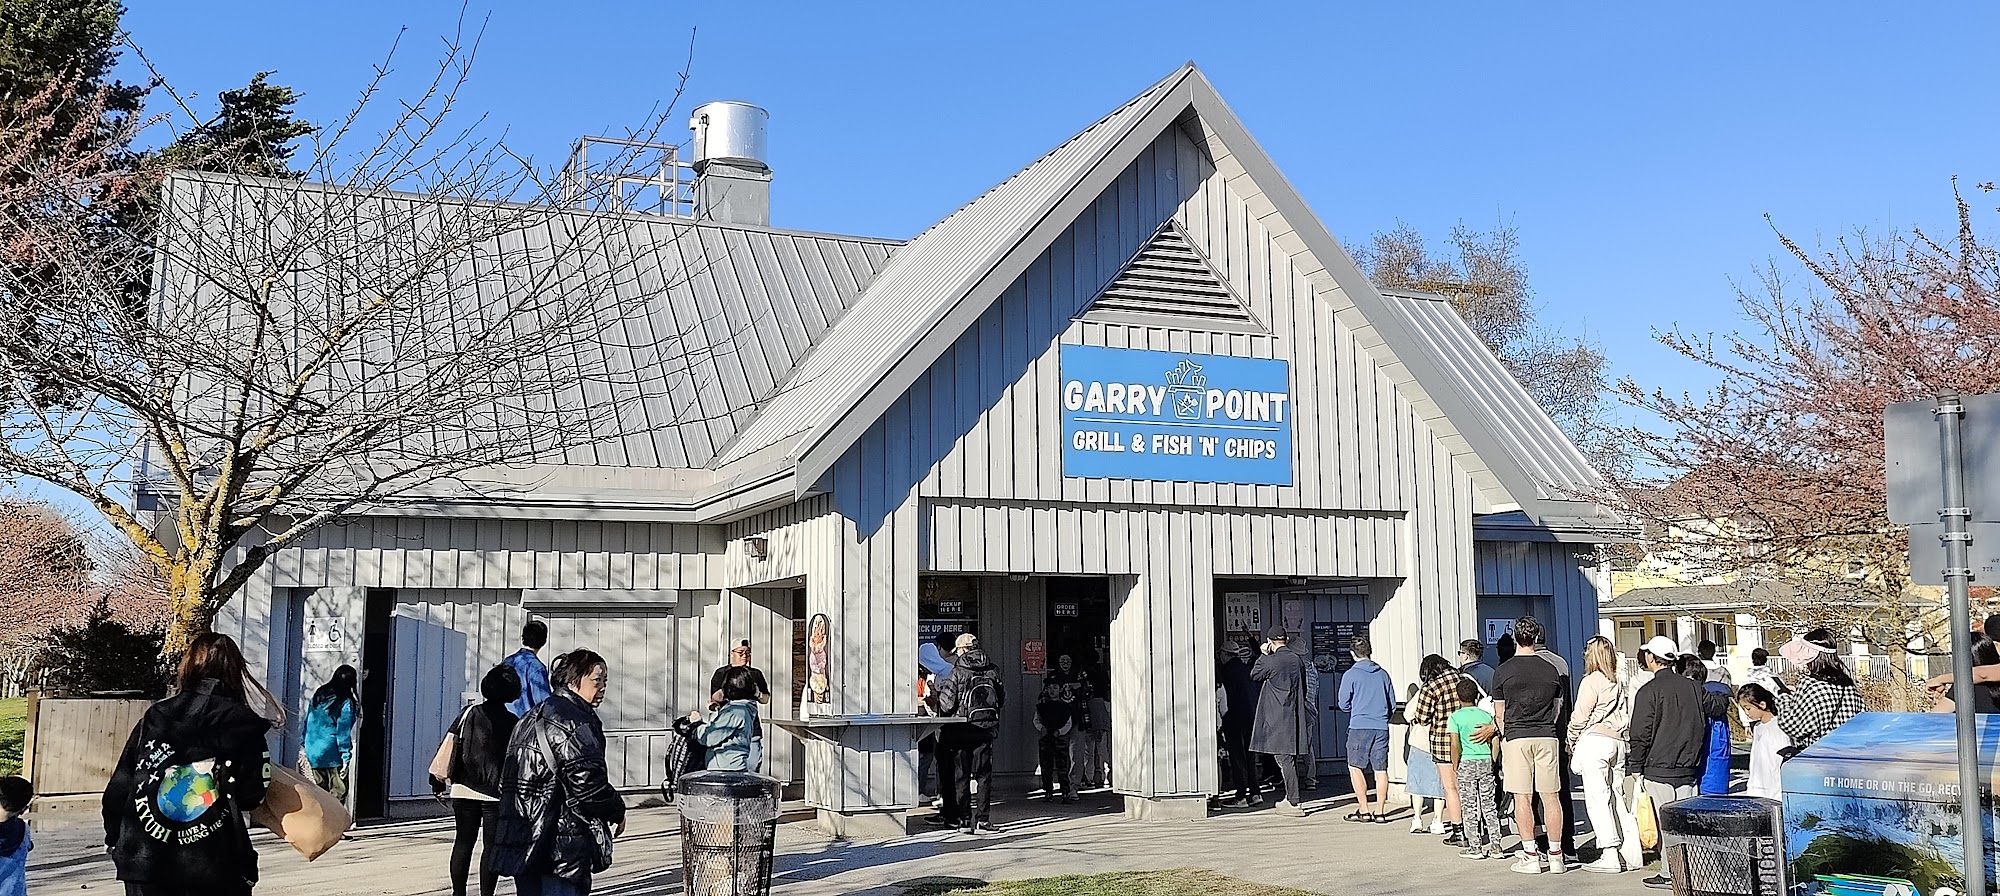 Garry Point Grill & Fish 'N' Chips